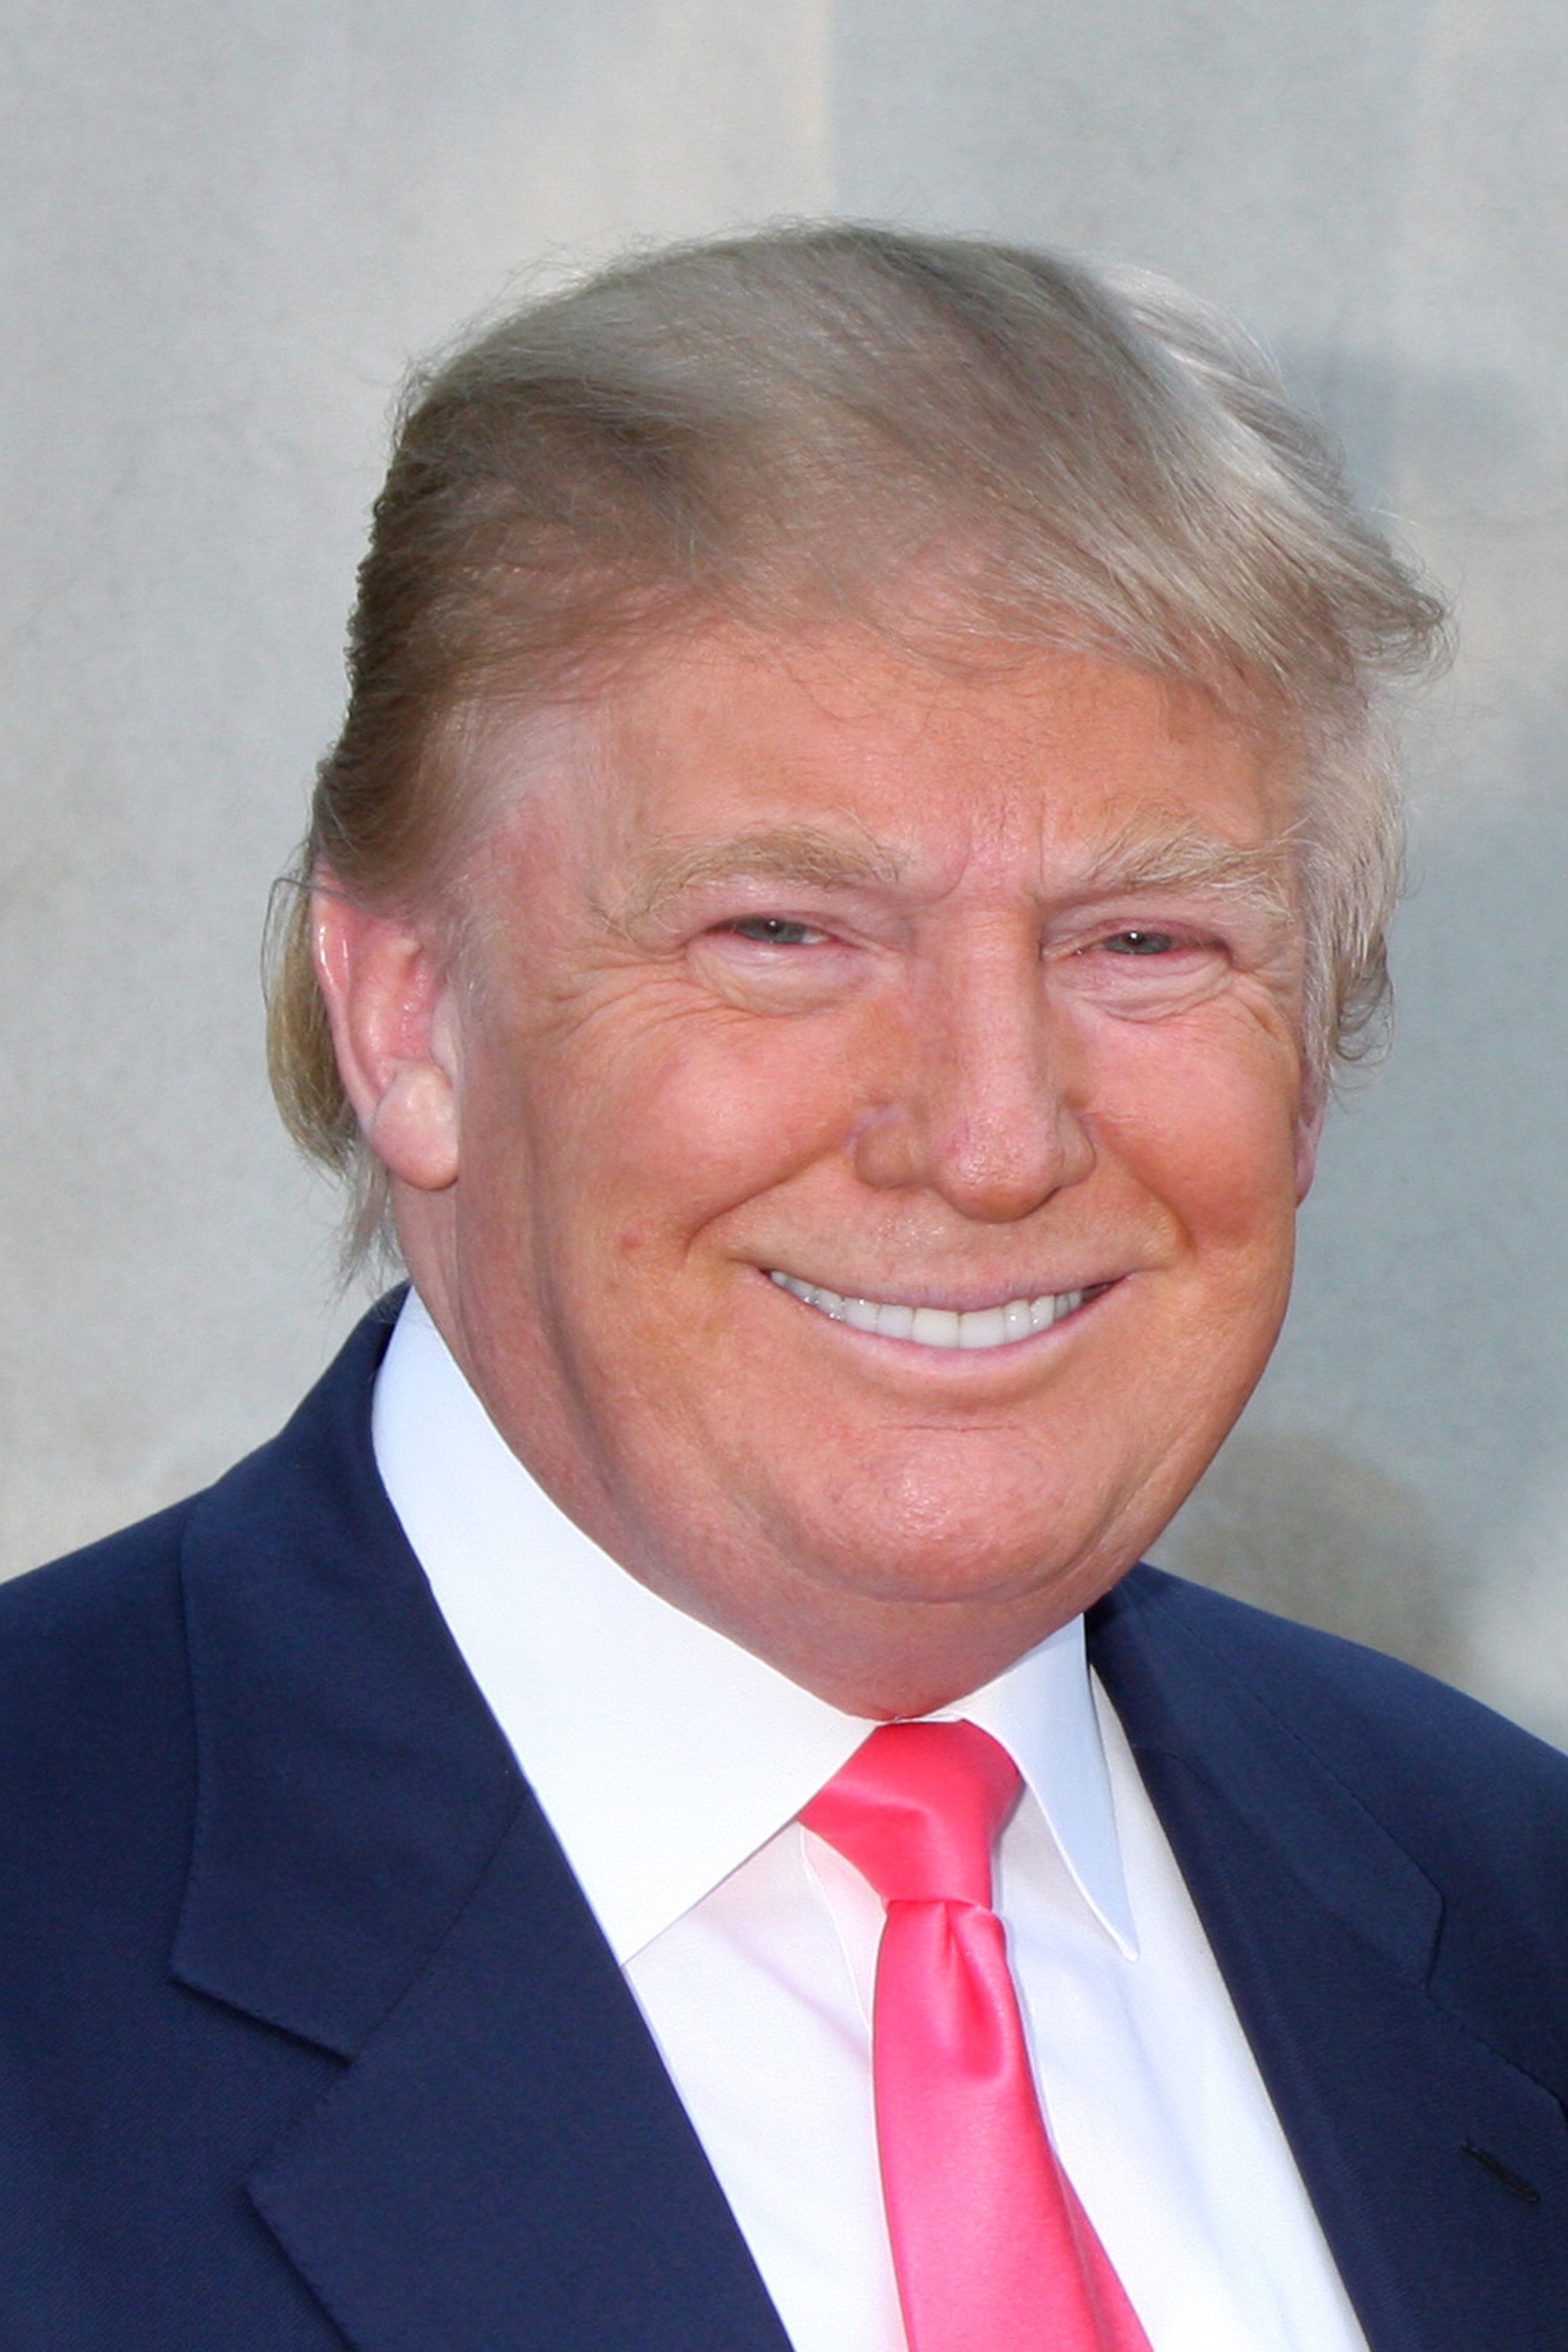 Donald Trump smiling wearing suit and tie